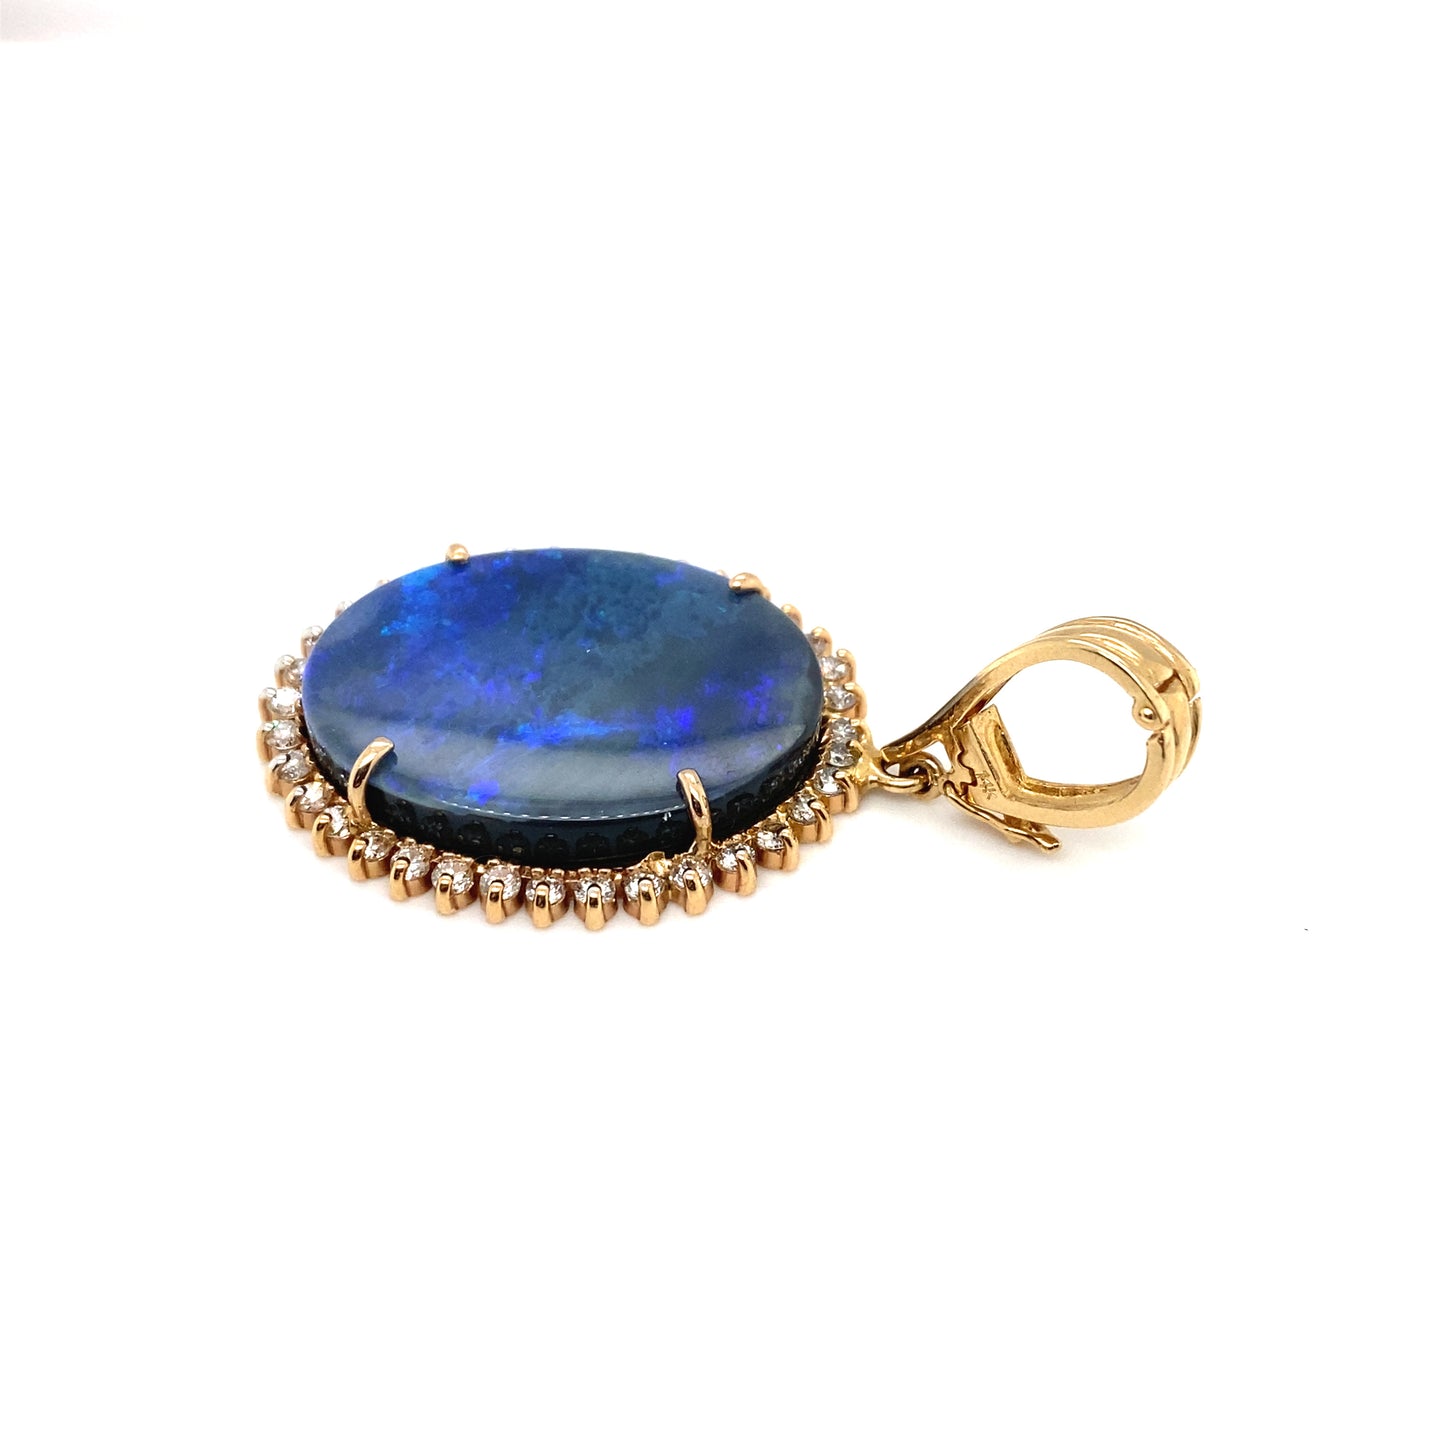 Circa 2000s Oval Opal Doublet Pendant with Diamonds in 14K Gold